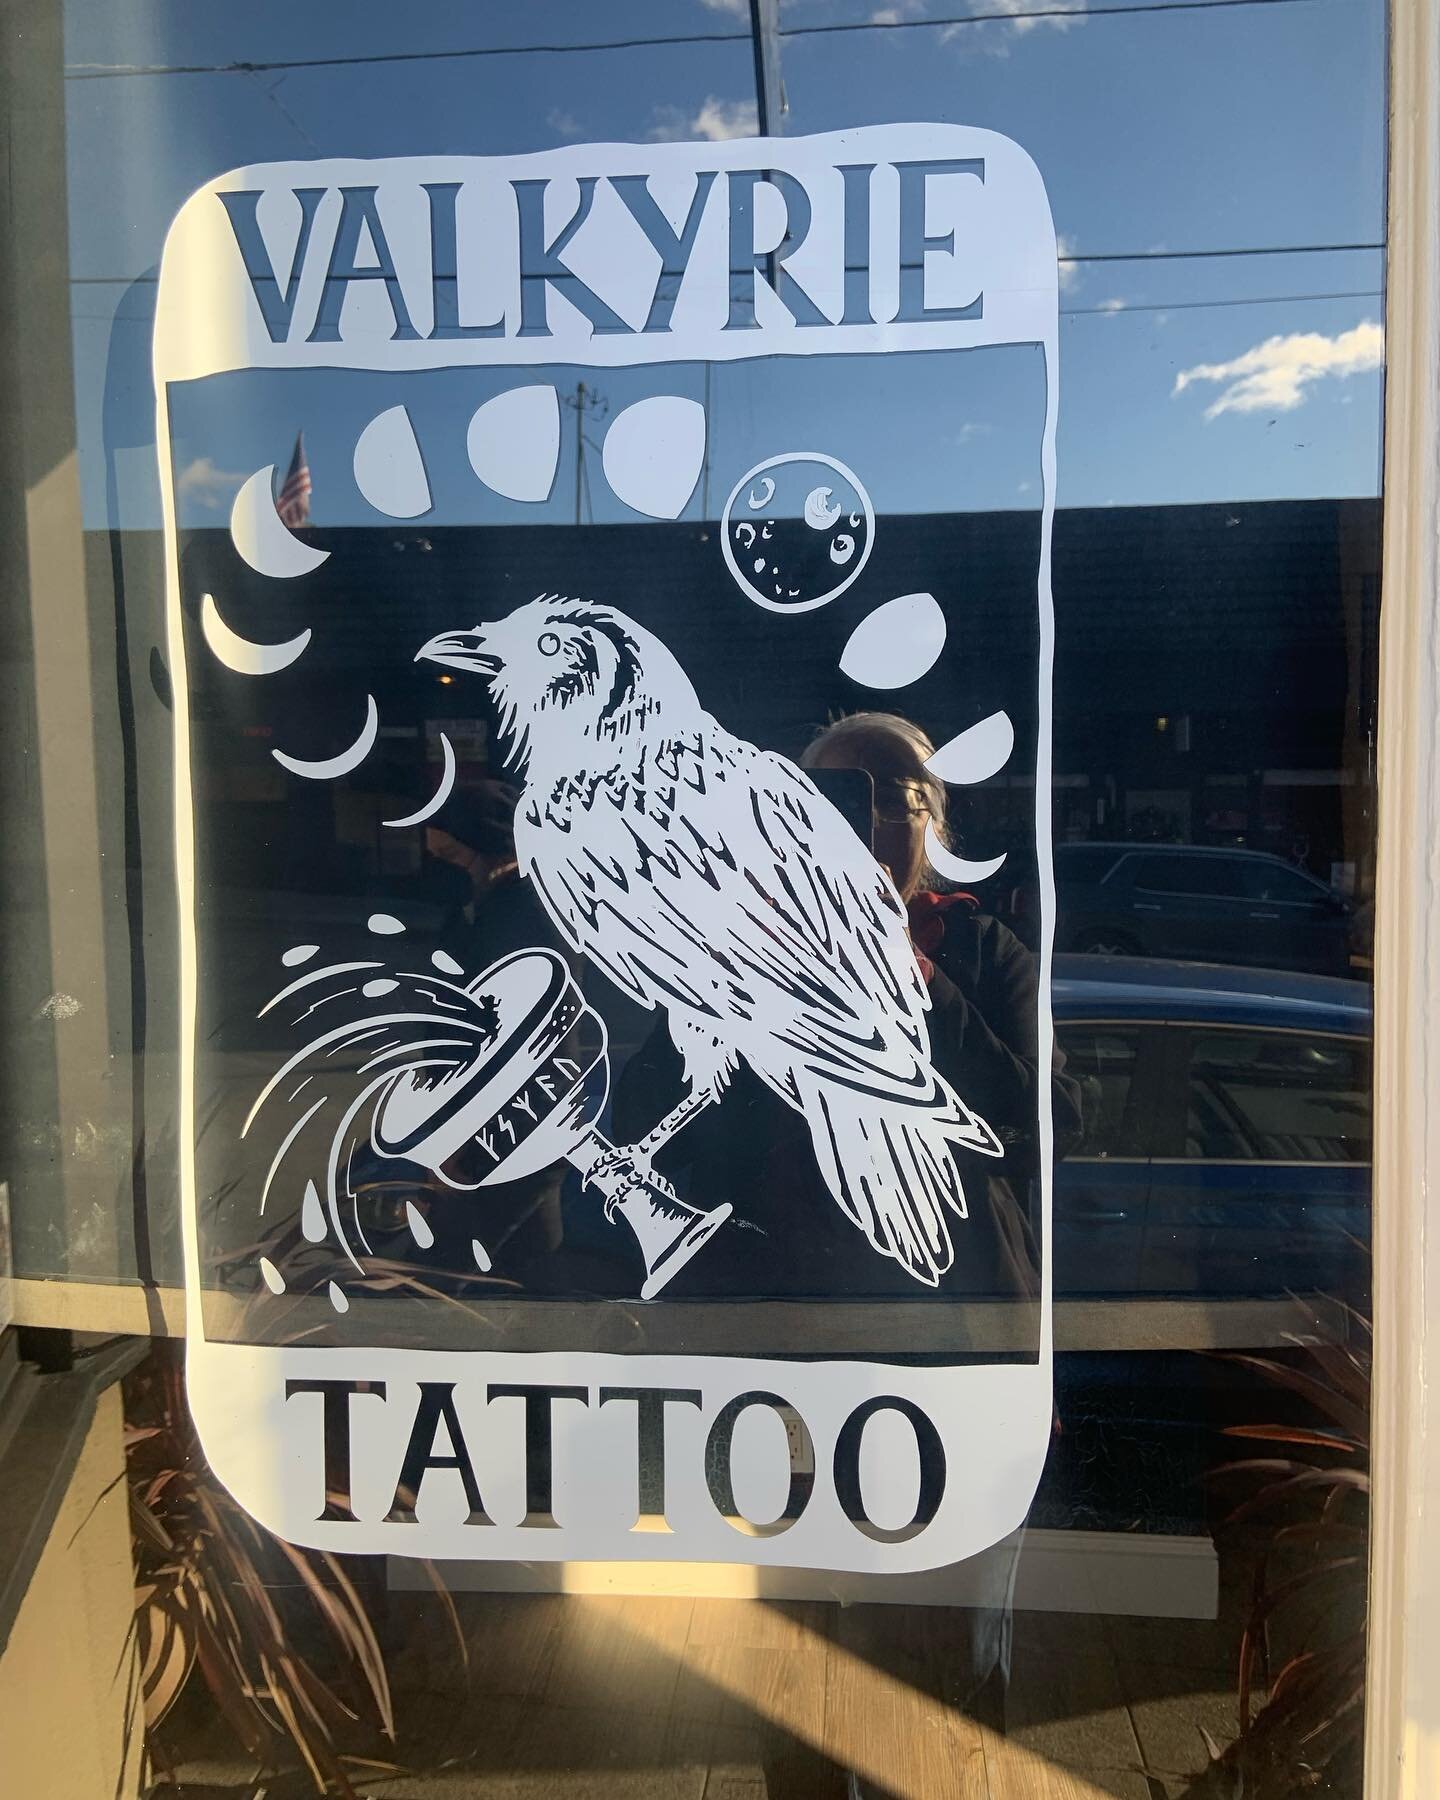 While Valkyrie has quite the reputation for amazing ink work, a step inside takes you to a whole other dimension. If you are looking for that original and unique holiday gift, you need go no further. While a gift certificate for tattoo services is al